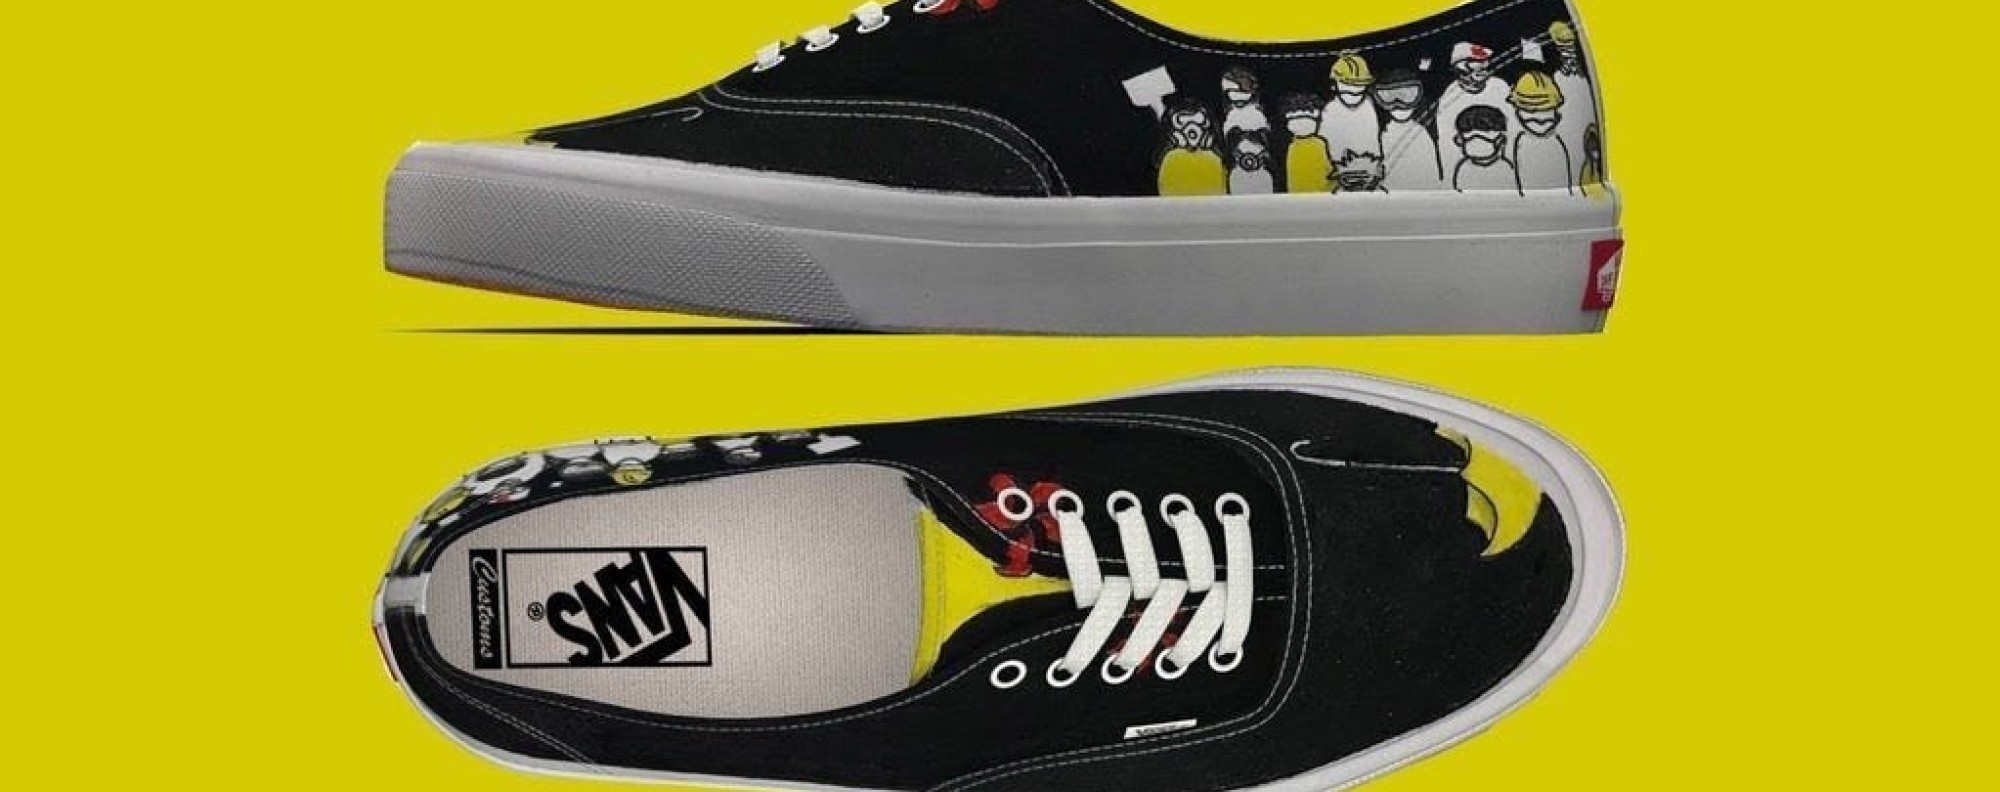 Vans sneakers pulled from in Hong Kong after protest-themed shoe contest designs removed by company, sparking backlash | South China Morning Post